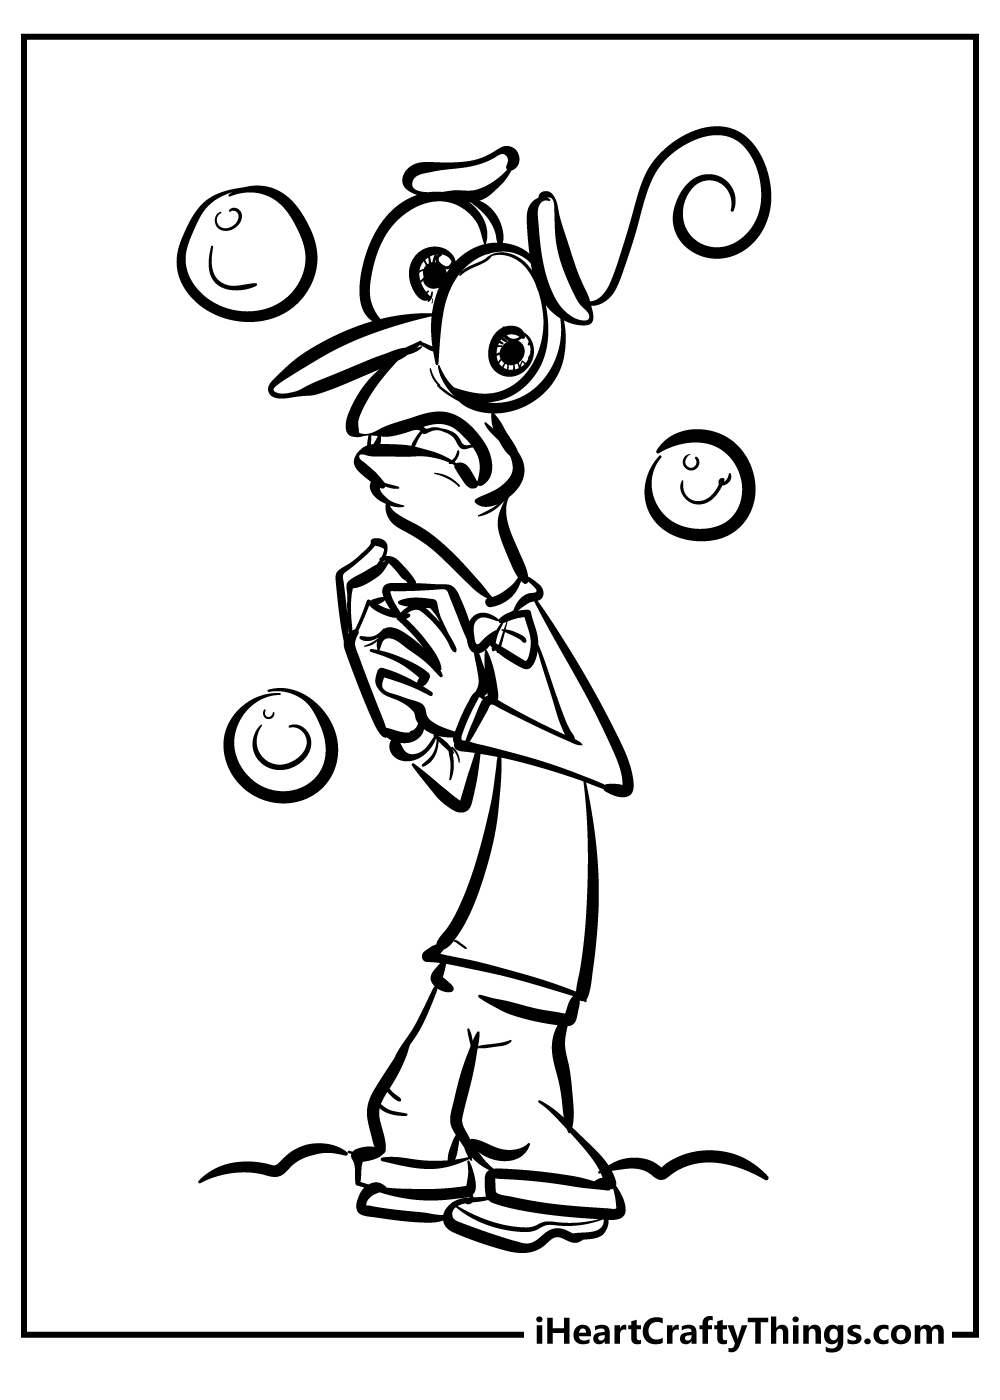 fear inside out coloring sheet free download